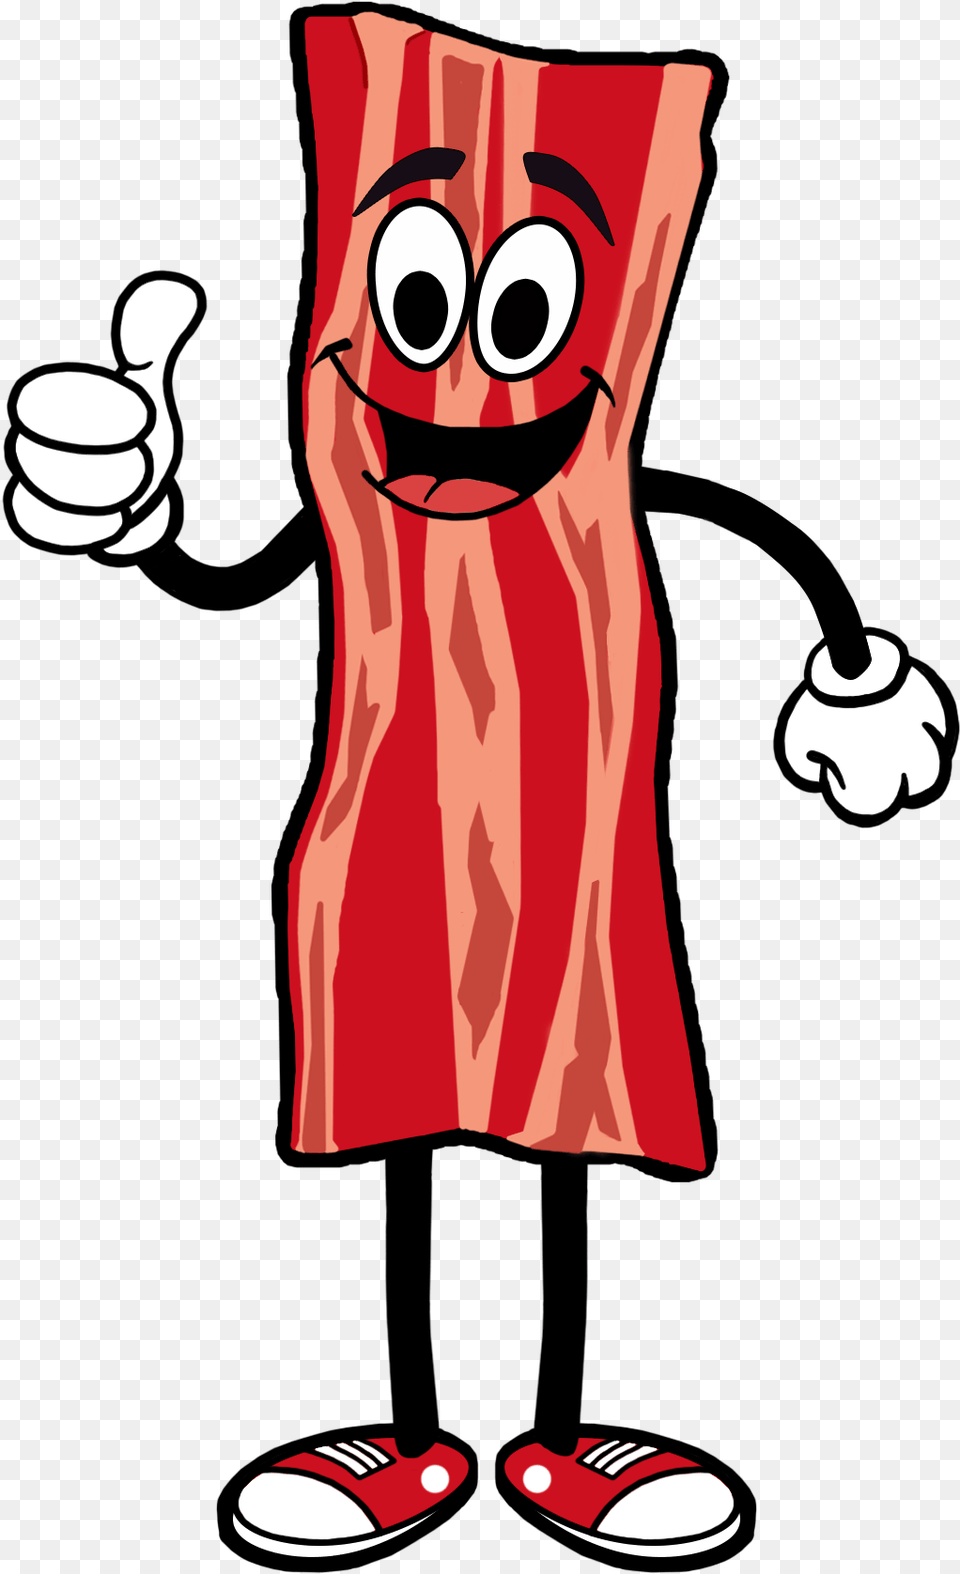 Bacon Cartoon Transparent Background Cartoon Bacon, Cutlery, Spoon, Adult, Female Free Png